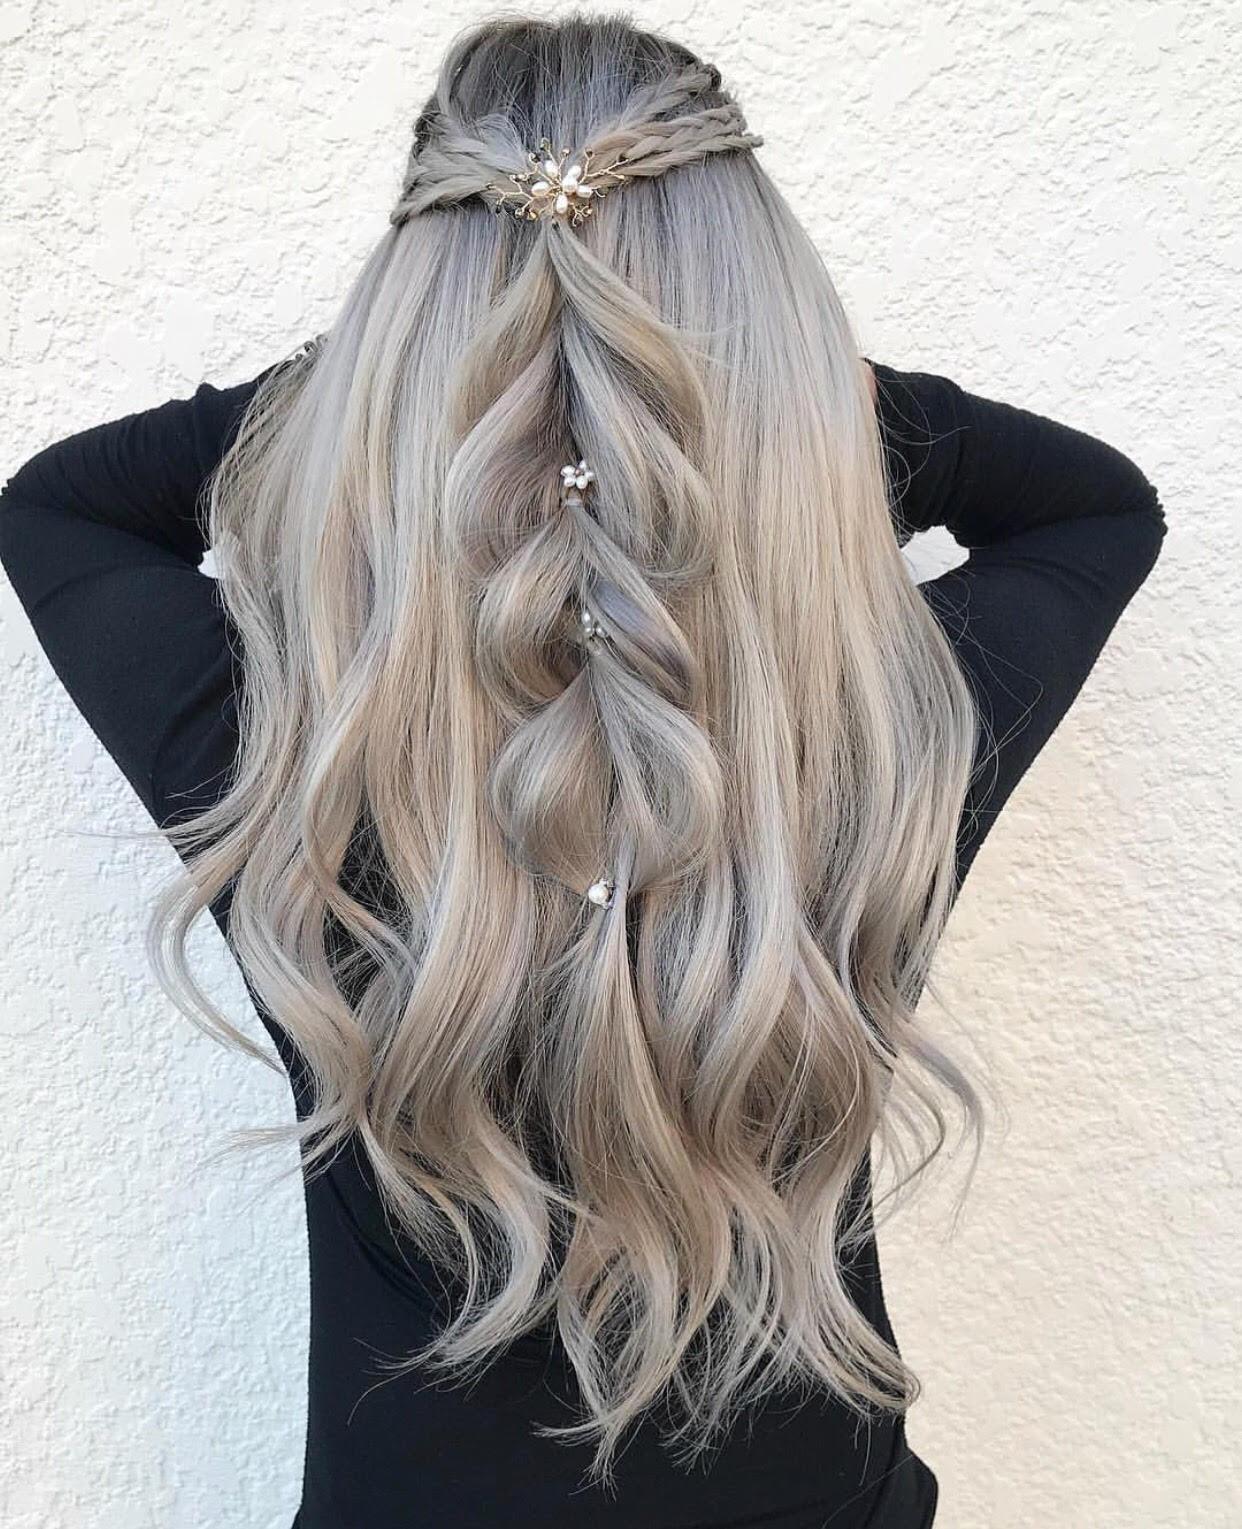 Ombres, Blondes And Balayage | Hair styles, Grey hair color, Grey ombre hair